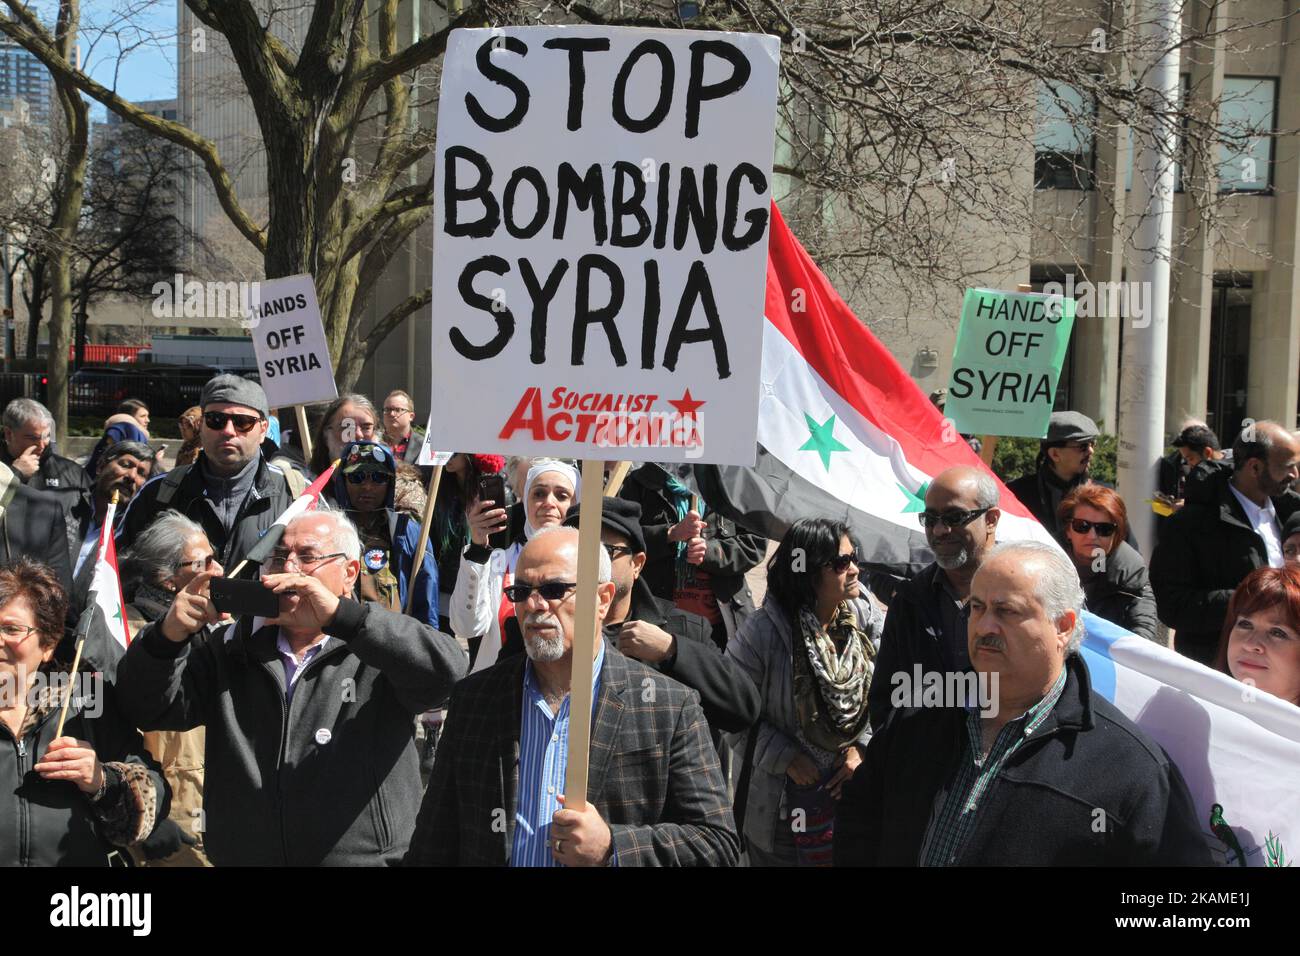 Protest against US President Donald Trump's decision to launch airstrikes against Syria on April 8, 2017 in Toronto, Ontario Canada. Protestors gathered to outside the American Consulate in Toronto to denounce this week's airstrikes against the Syrian regime. America launched a missile strike against Syria for the first time since the civil war began, targeting an airbase in the small town of Idlib from which the United States claims this week’s chemical weapons attack on civilians was launched by Bashar al-Assad’s regime. (Photo by Creative Touch Imaging Ltd./NurPhoto) *** Please Use Credit f Stock Photo